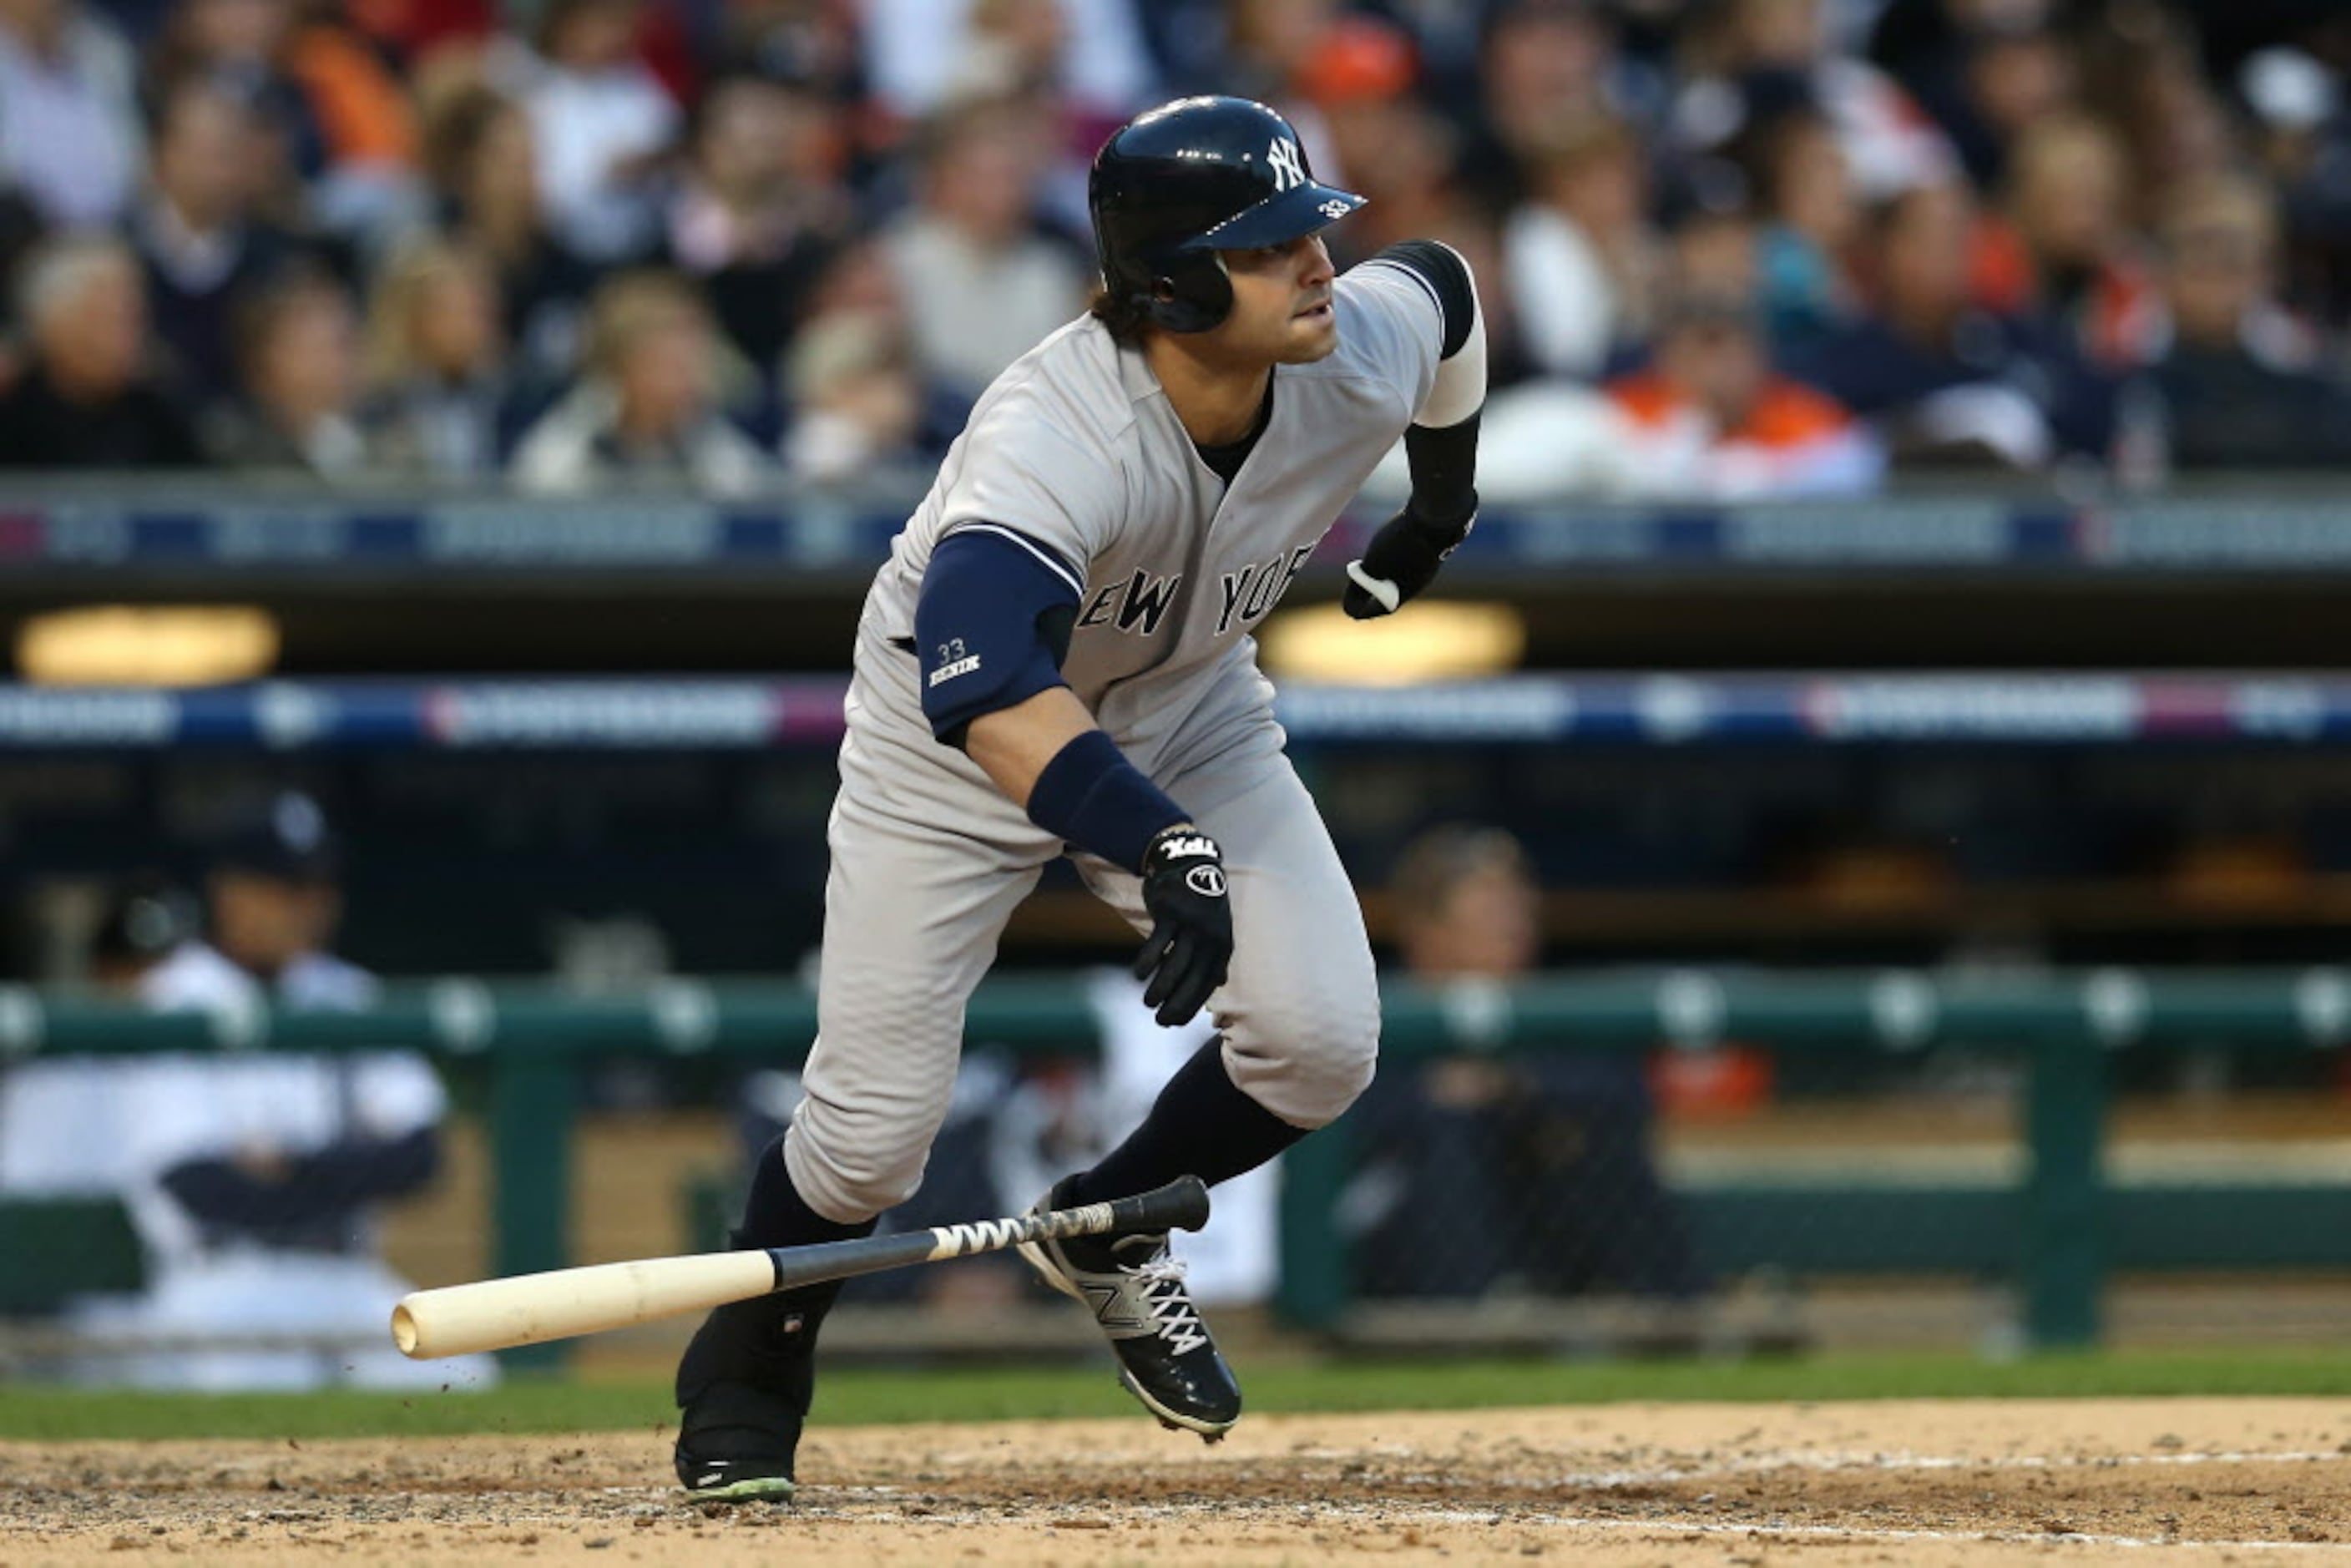 Free agent OF Nick Swisher signs four-year, $56 million deal with Indians